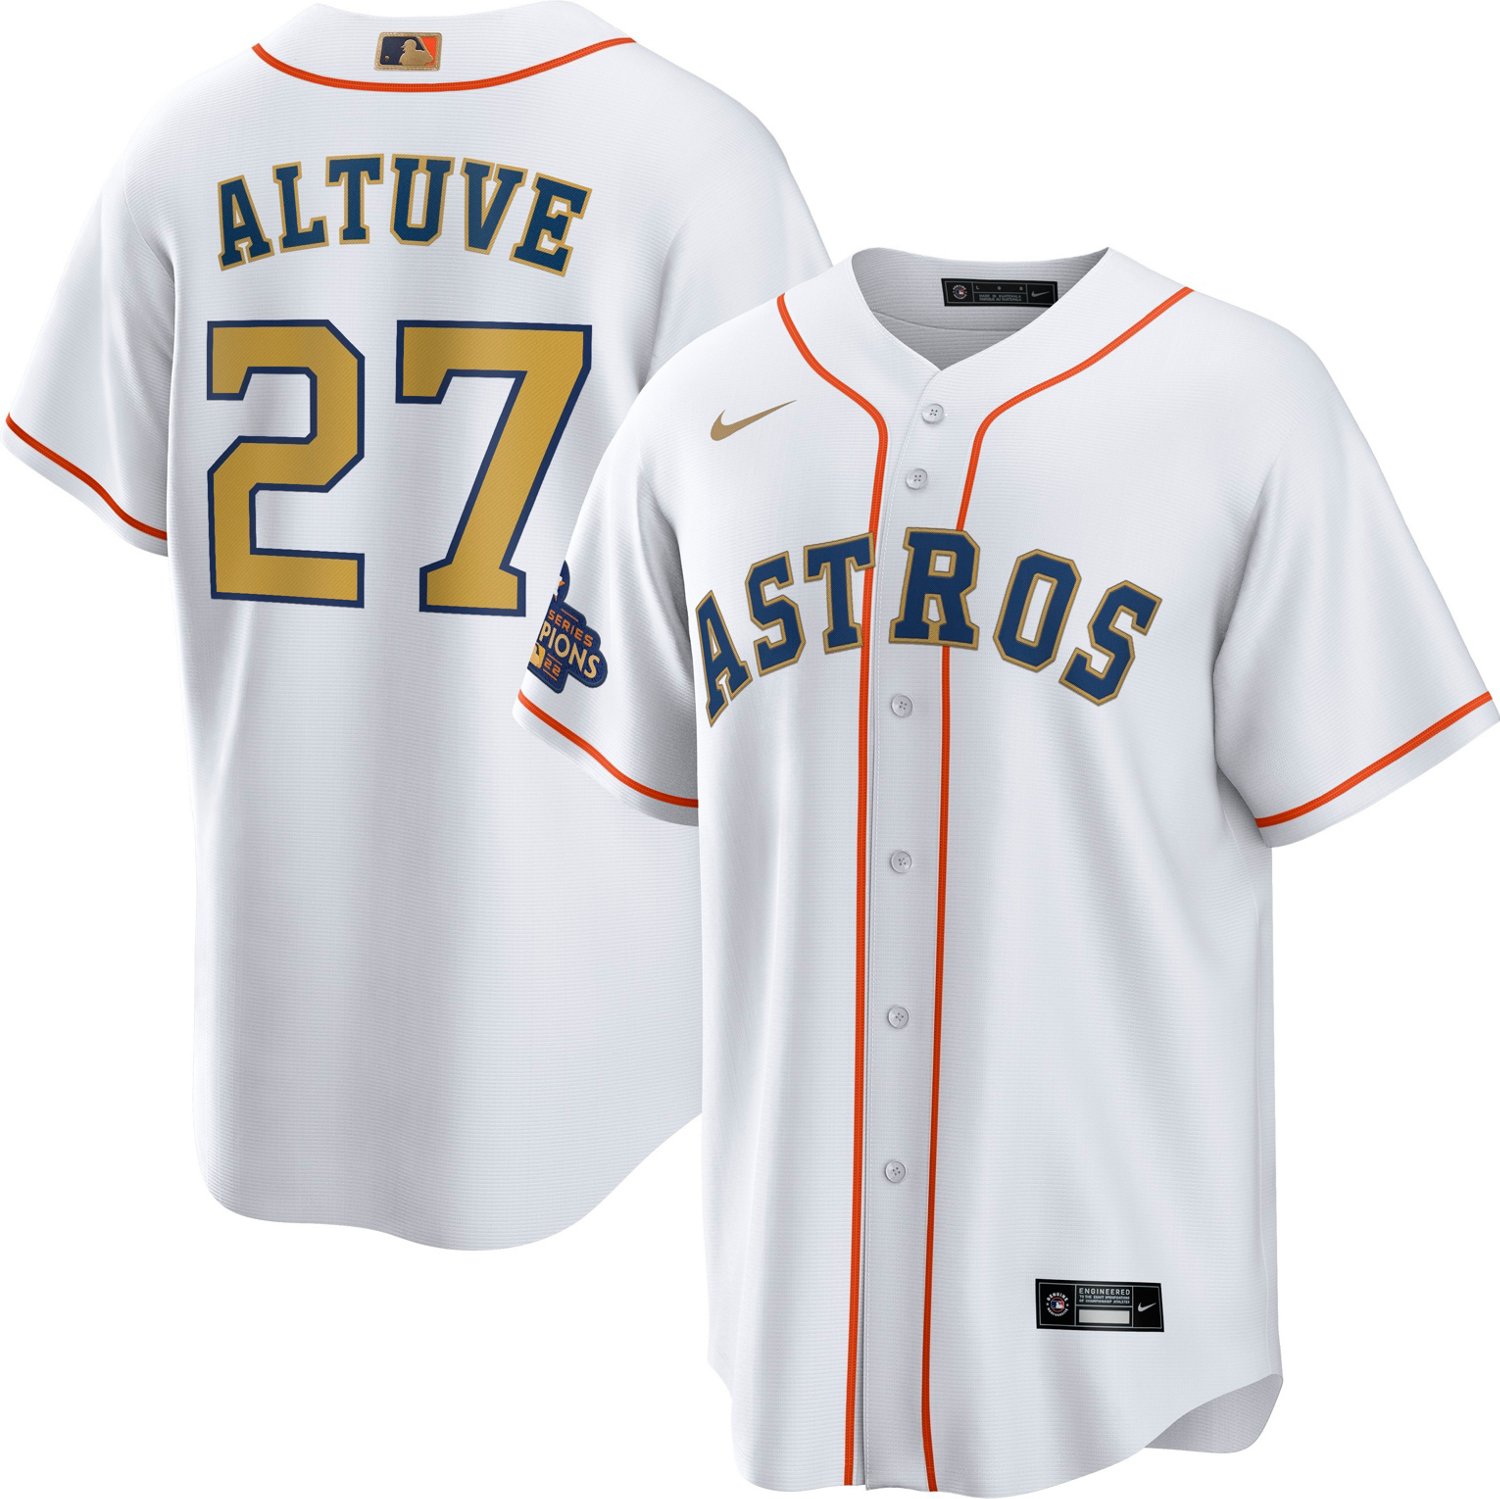 Academy Sports and Outdoors to sell Astros Gold Collection Gear in April